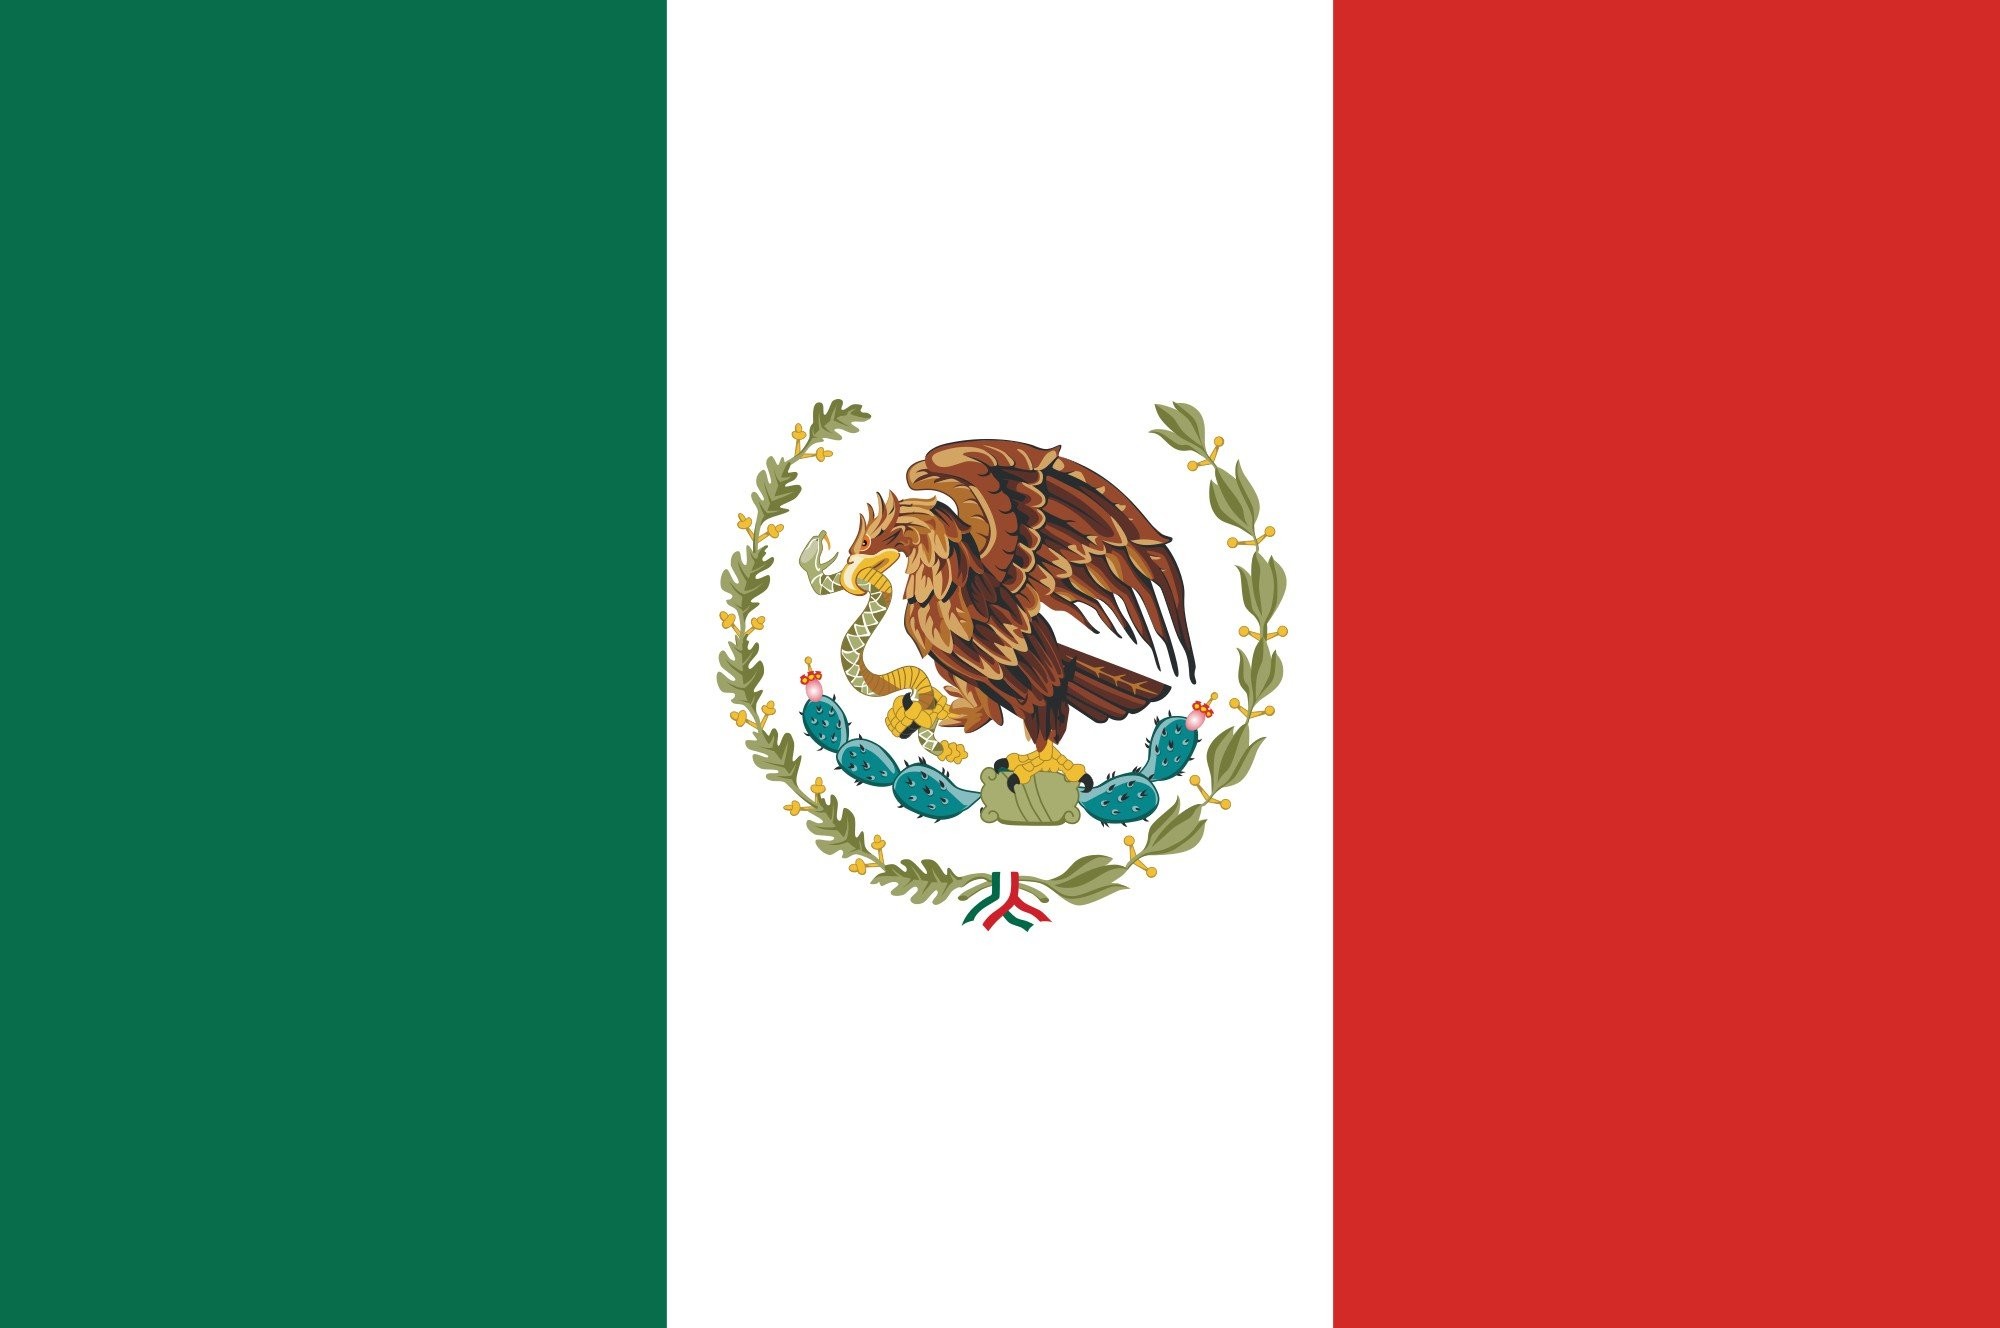 2000x1328 mexico flag - Free Large Images | Download Wallpaper | Pinterest | Mexico  flag and Wallpaper